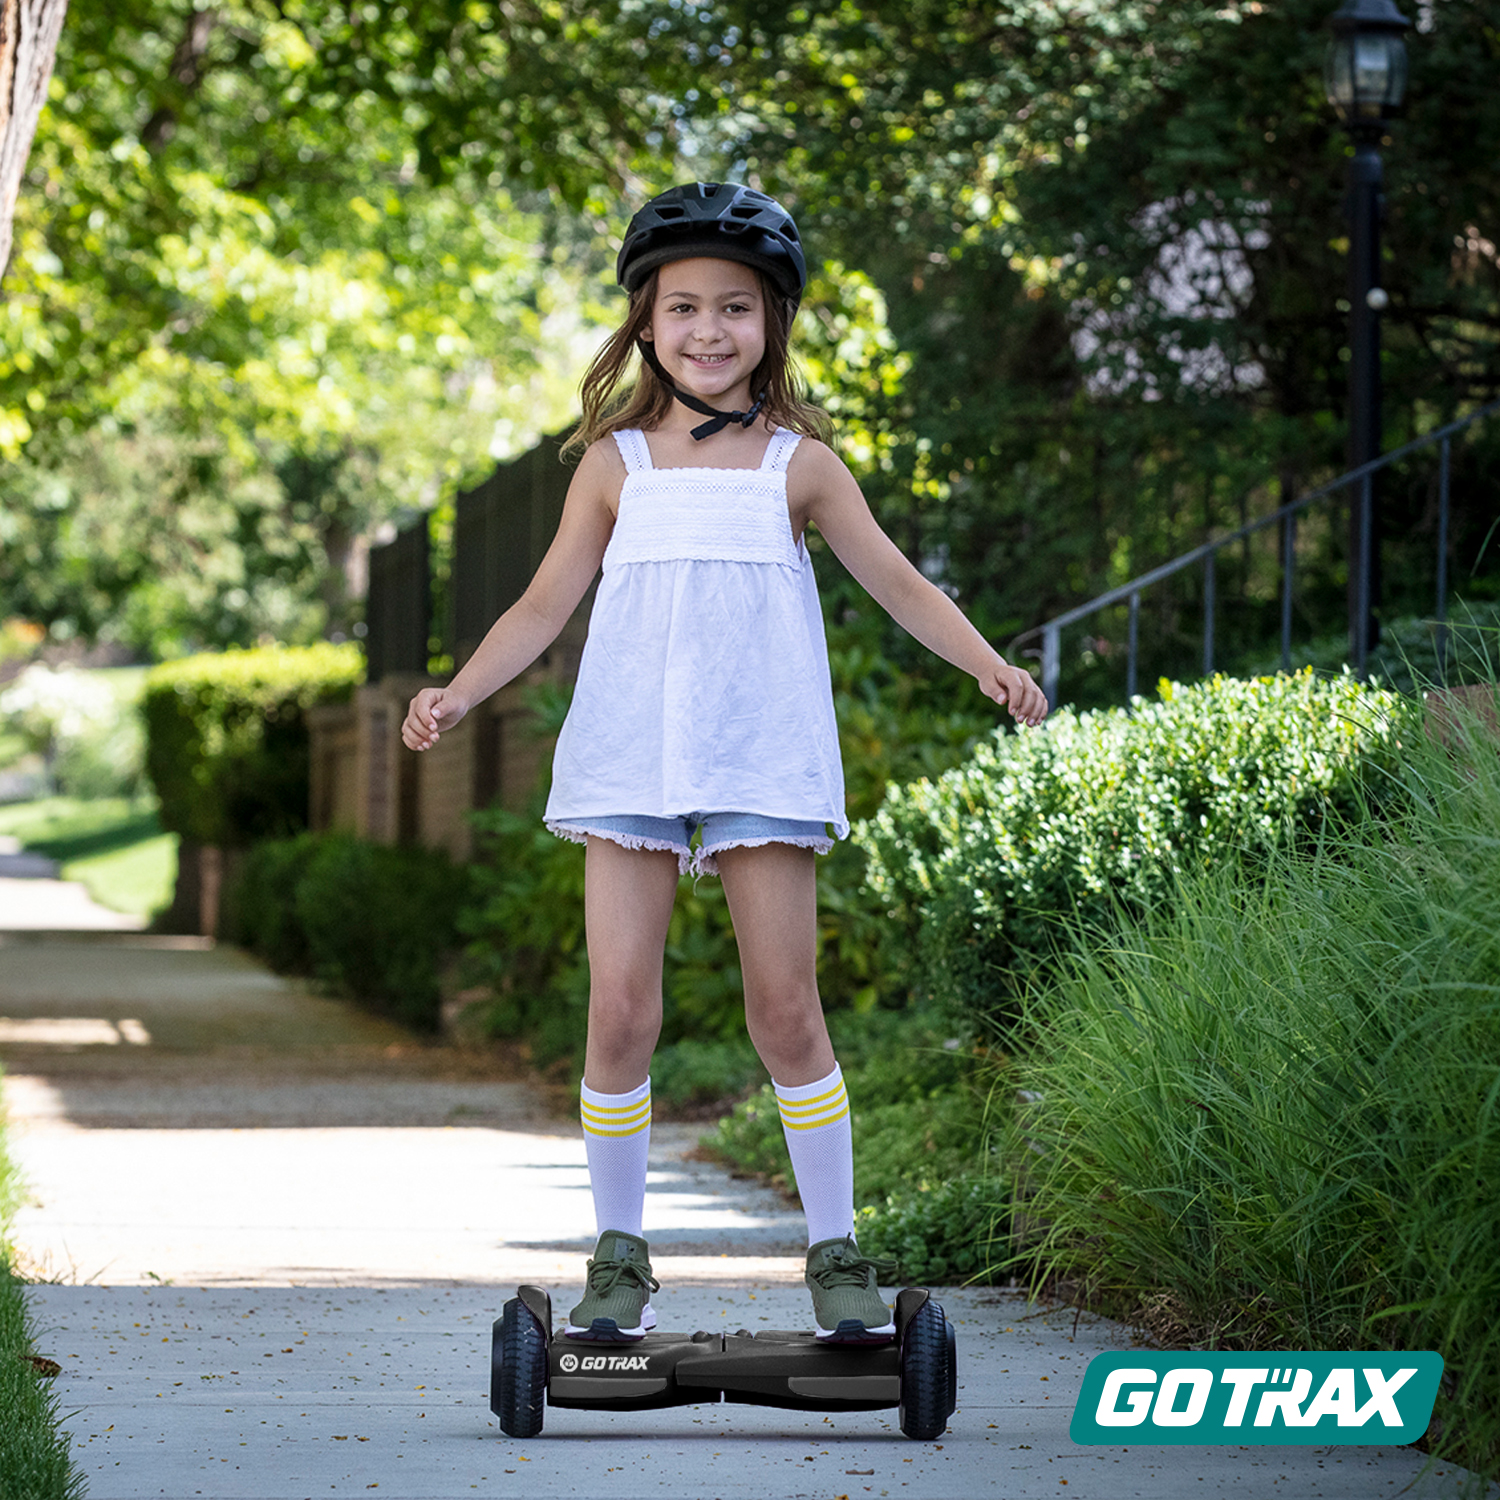 GOTRAX SRX Mini Hoverboard for Kids 6-12, 6.5" Wheels 150W Motor up to 5 mph Hover Boards Black - image 2 of 12